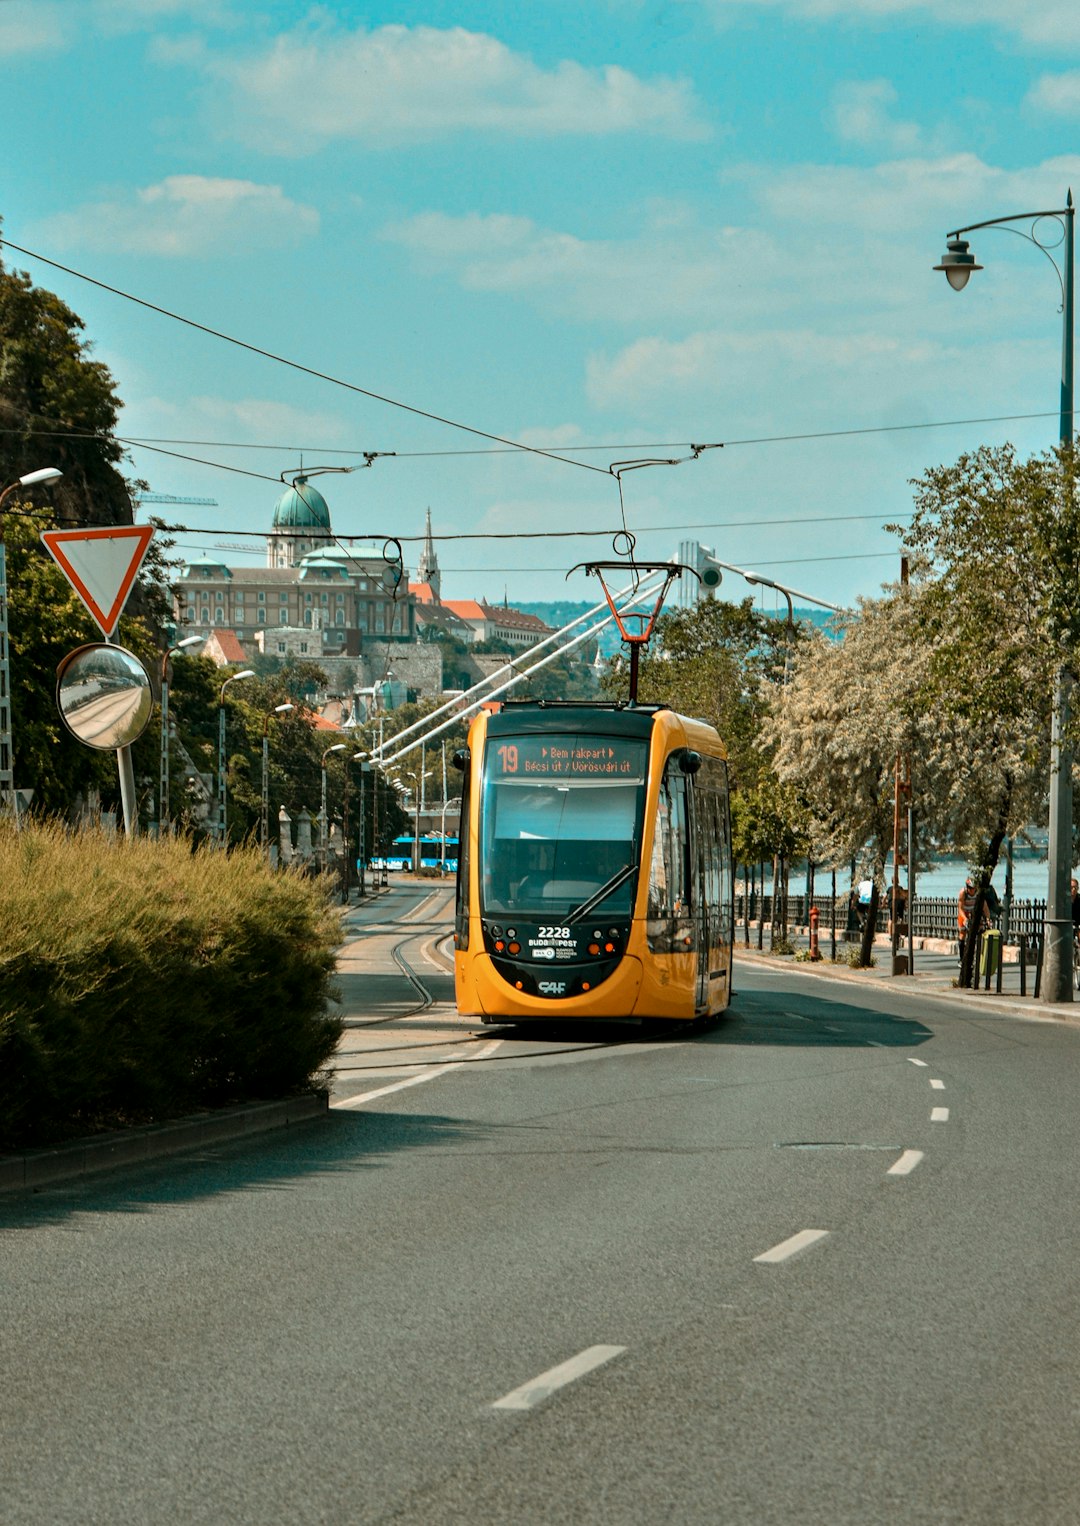 yellow and black tram on road during daytime